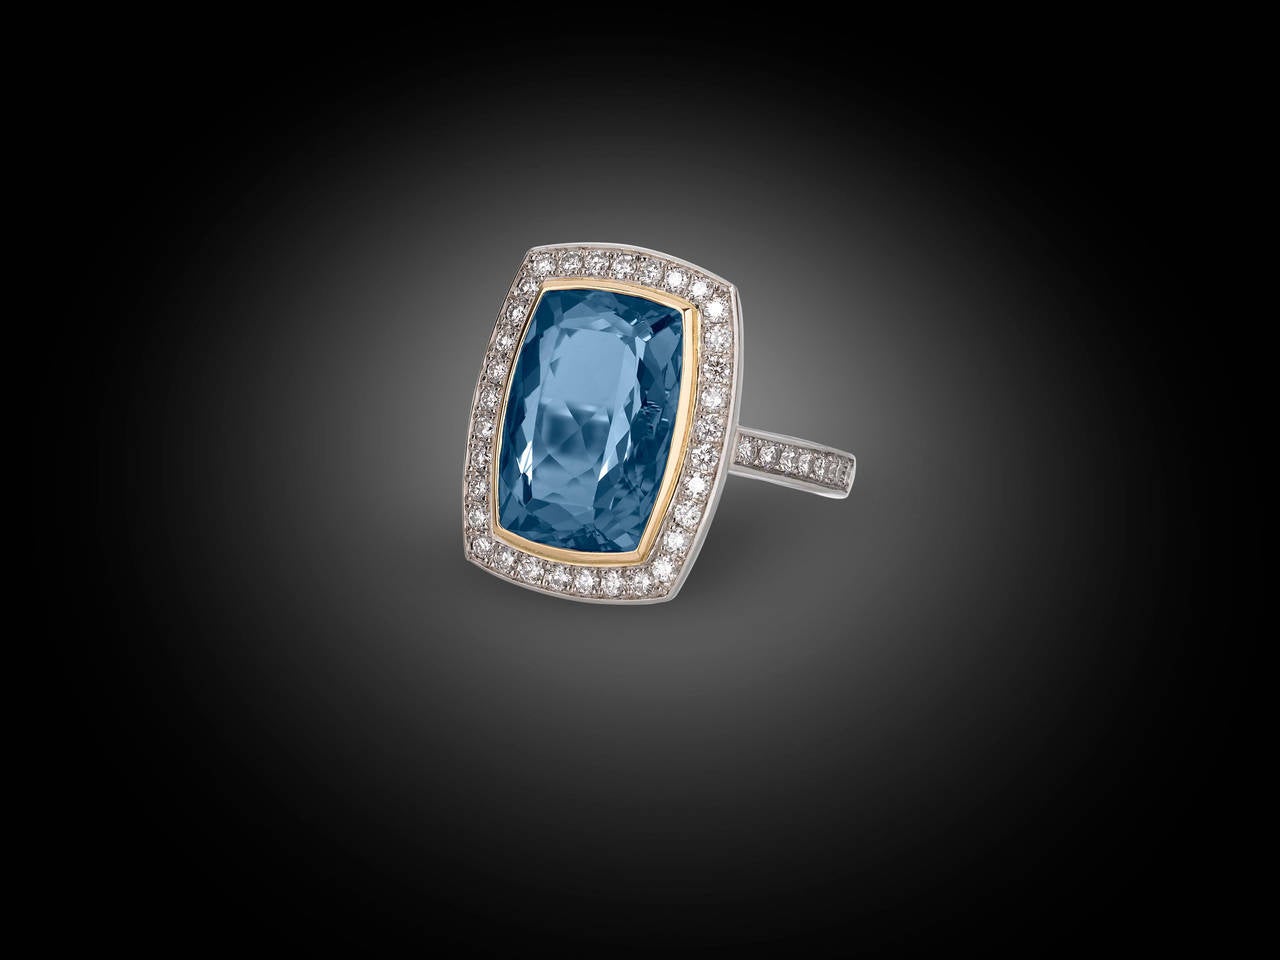 Drama and sophistication mark this eye-catching aquamarine and diamond ring. A truly spectacular stone, the 7.37-carat cushion-cut aquamarine exhibits a radiant and clear ocean-blue hue that is perfectly complemented by a border of 18k yellow gold.